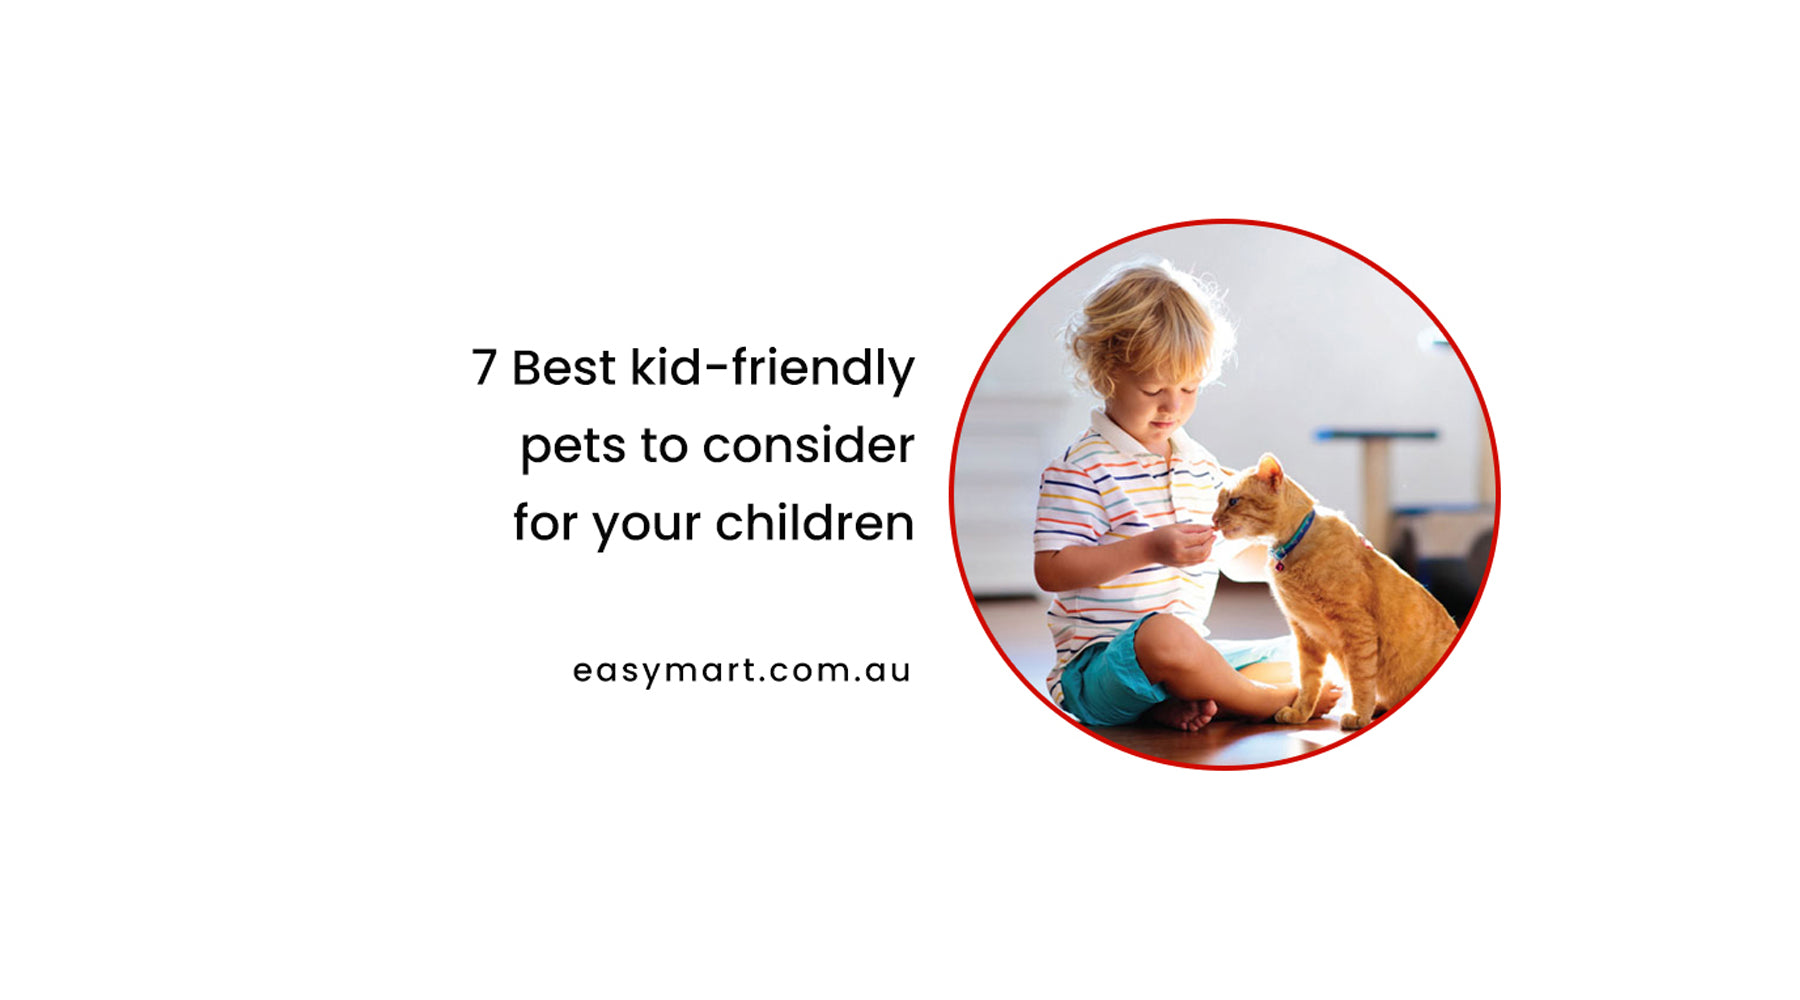 7 Best kid-friendly pets to consider for your children